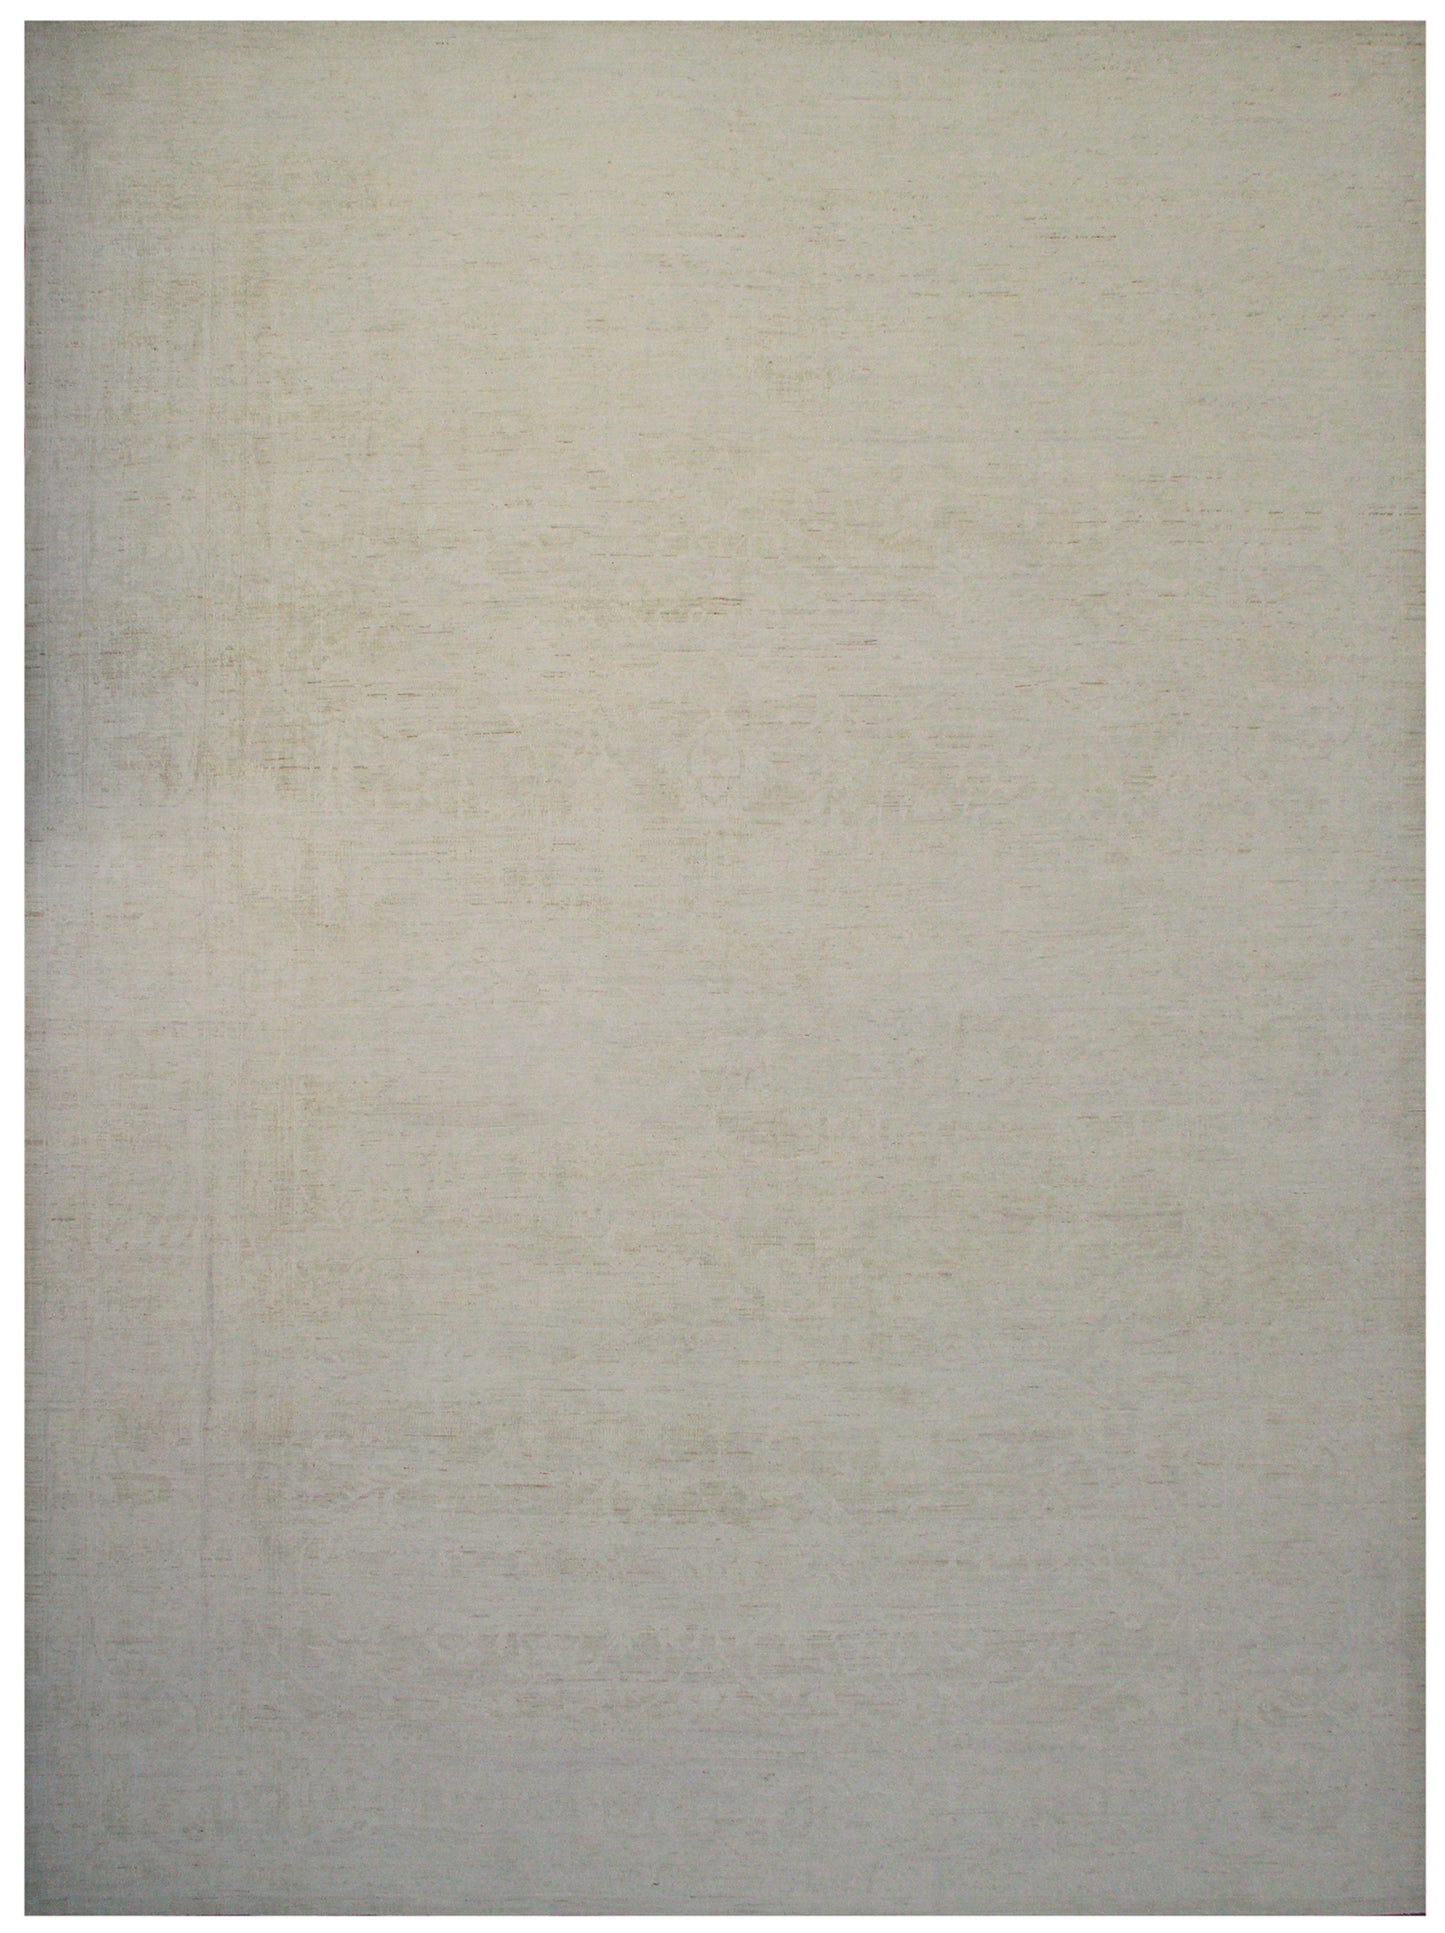 10'x14' Pale Washed-out Cream Ariana Transitional Rug